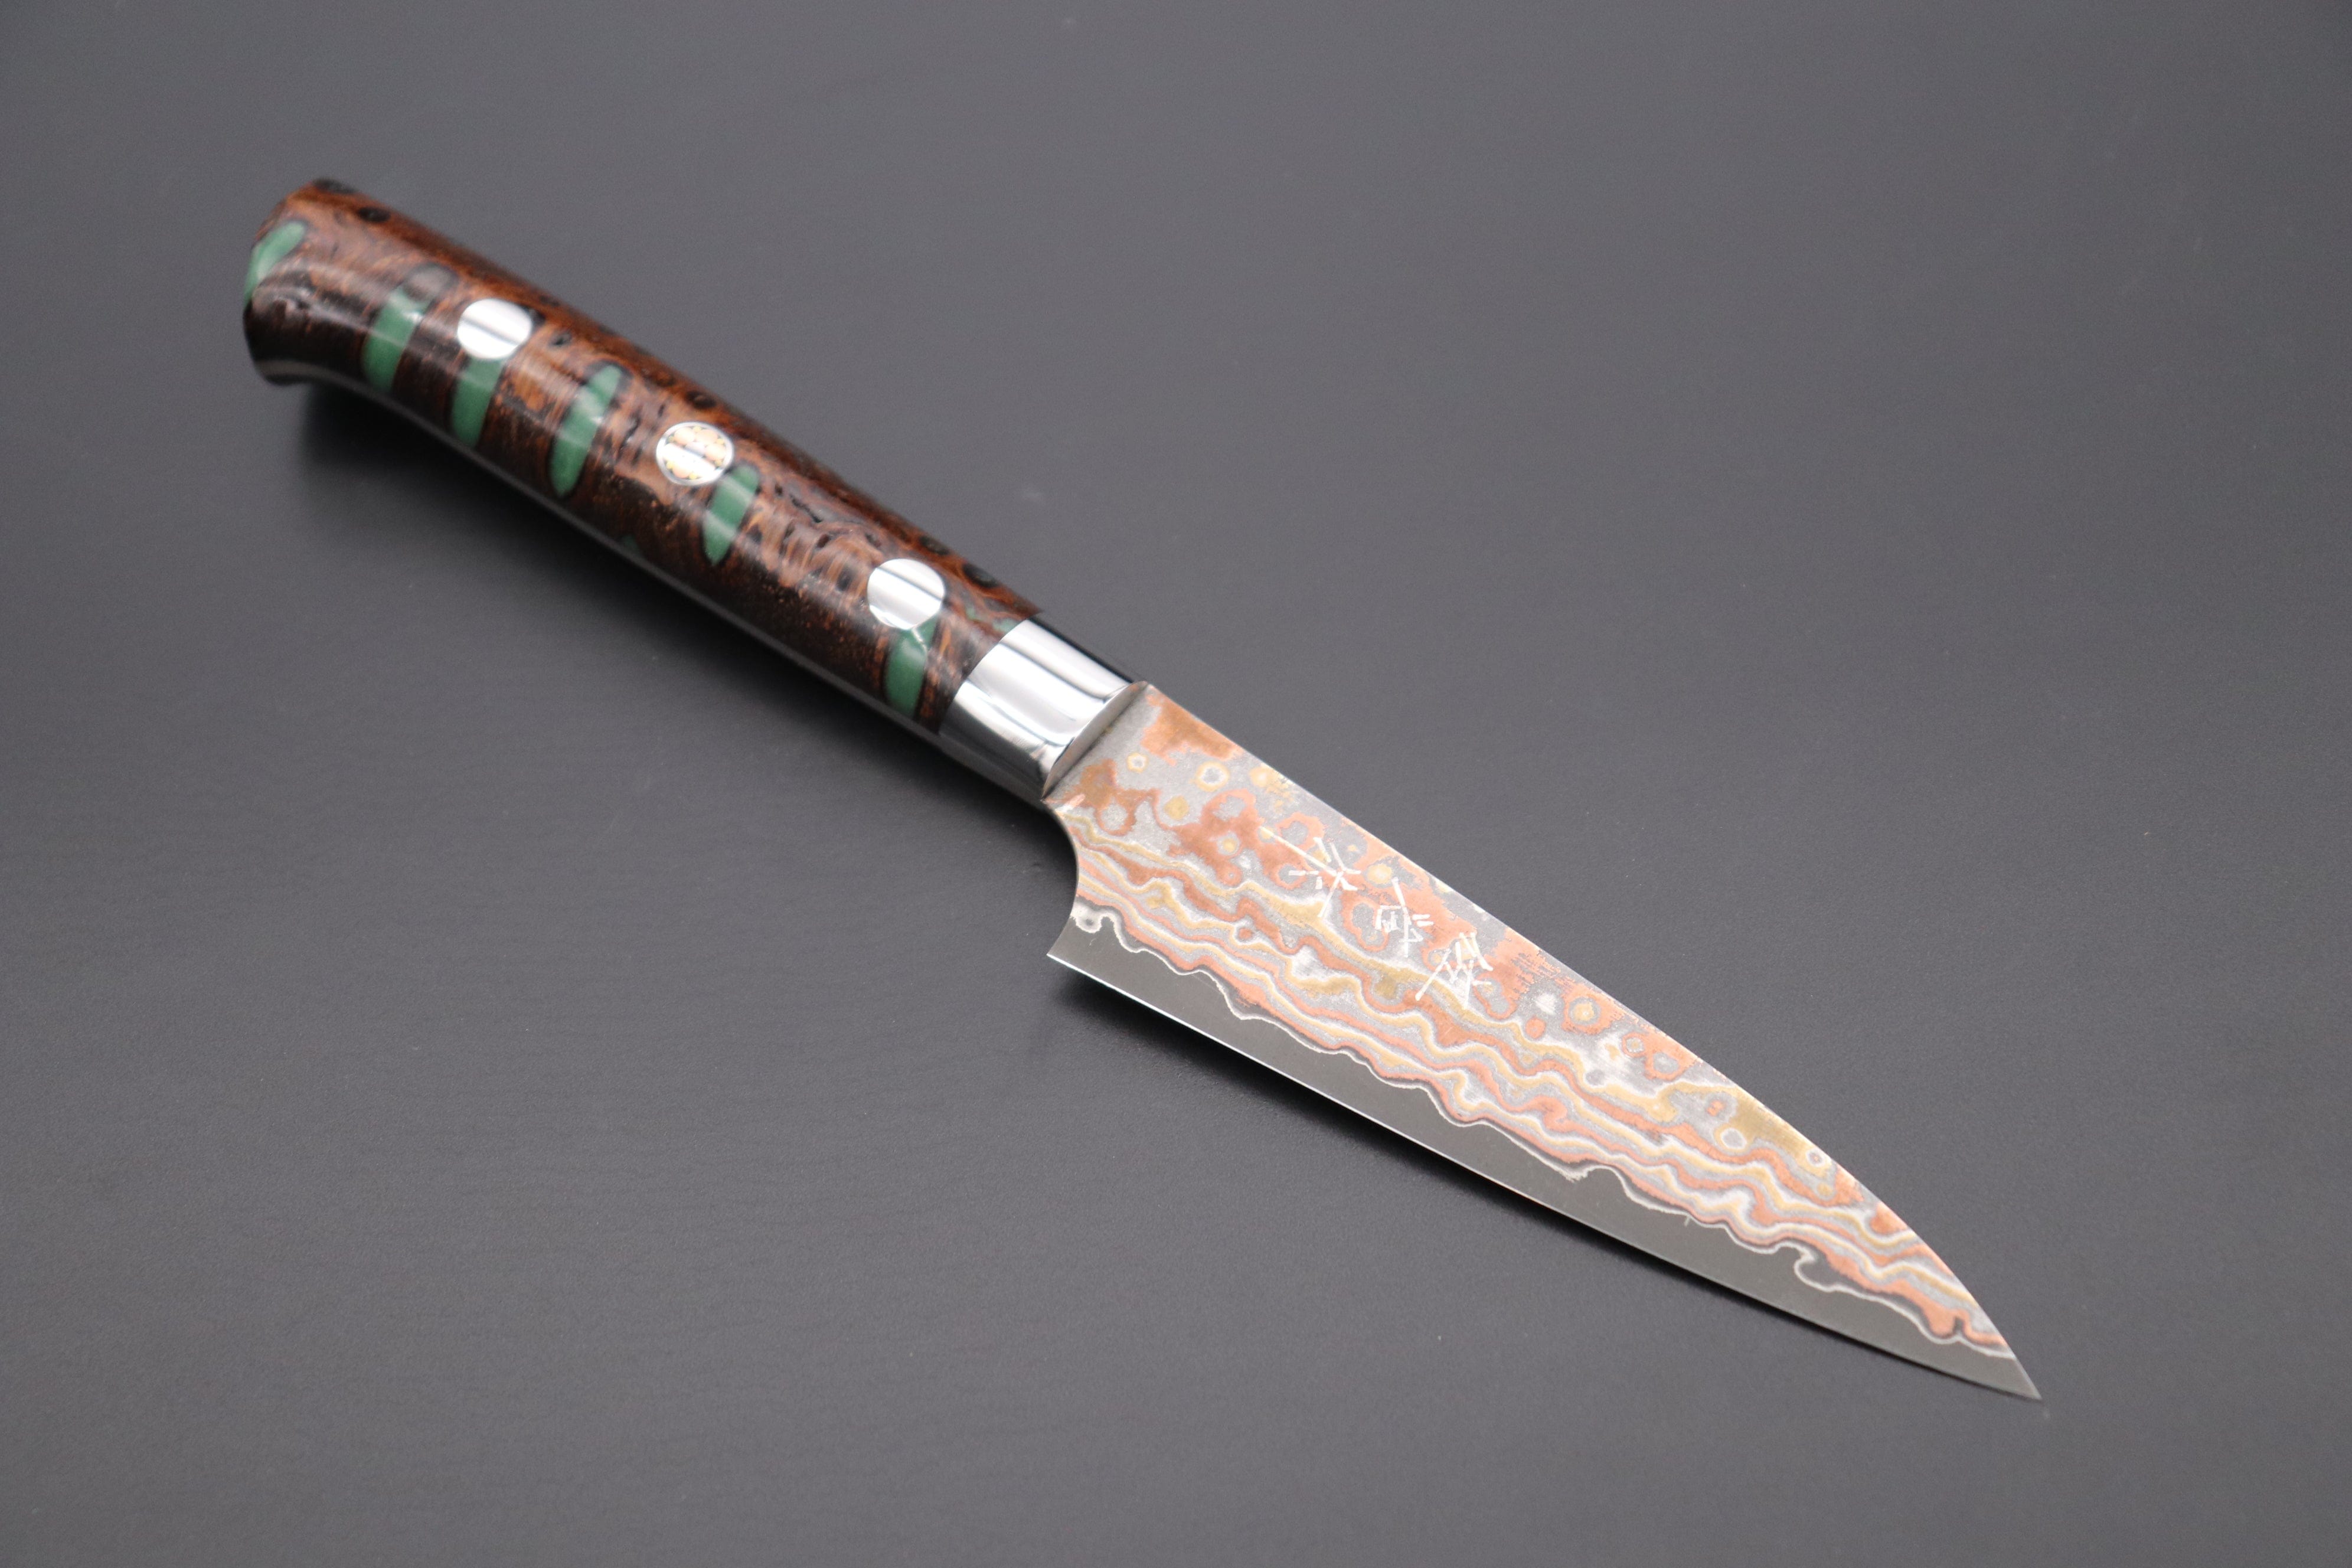 New Handcrafted VG10 Copper Damascus Kitchen Utility Knife for Sale